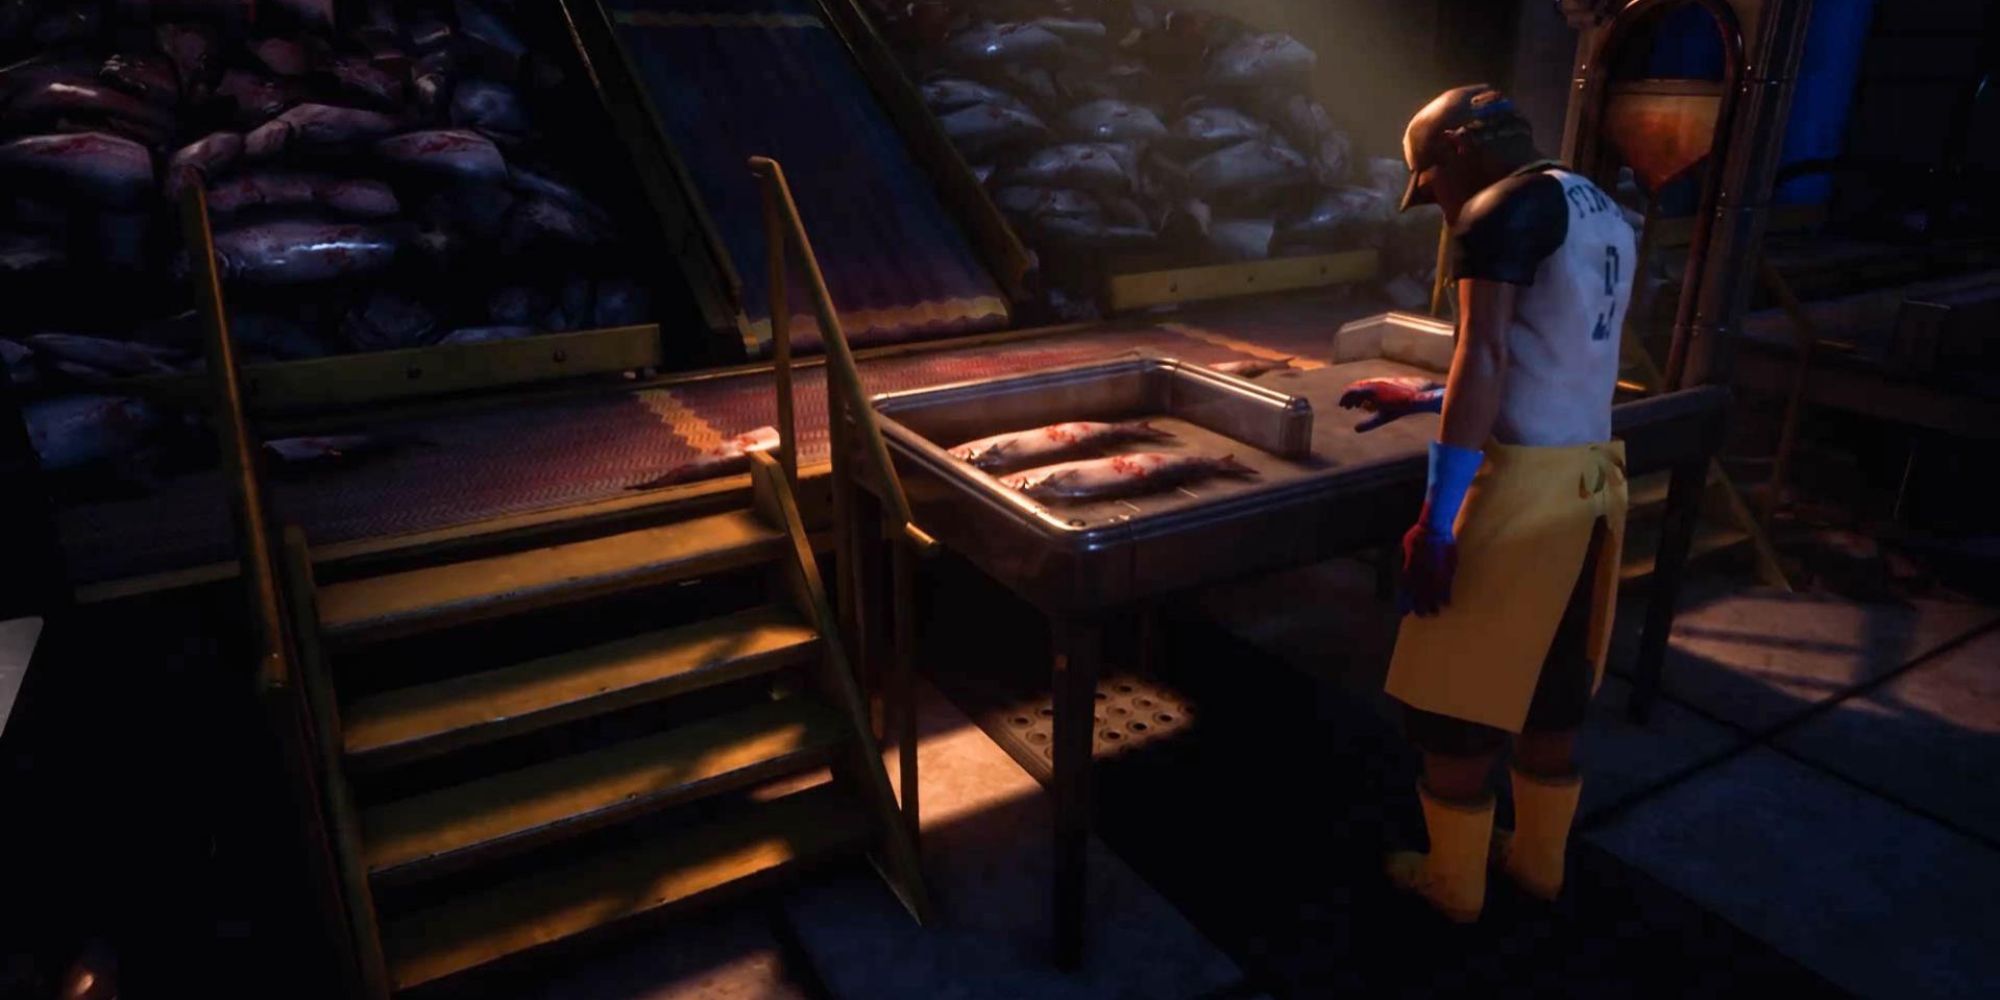 What Remains of Edith Finch puts players in the shoes of Edith as she explores her family history to find out why she is the last one left alive.